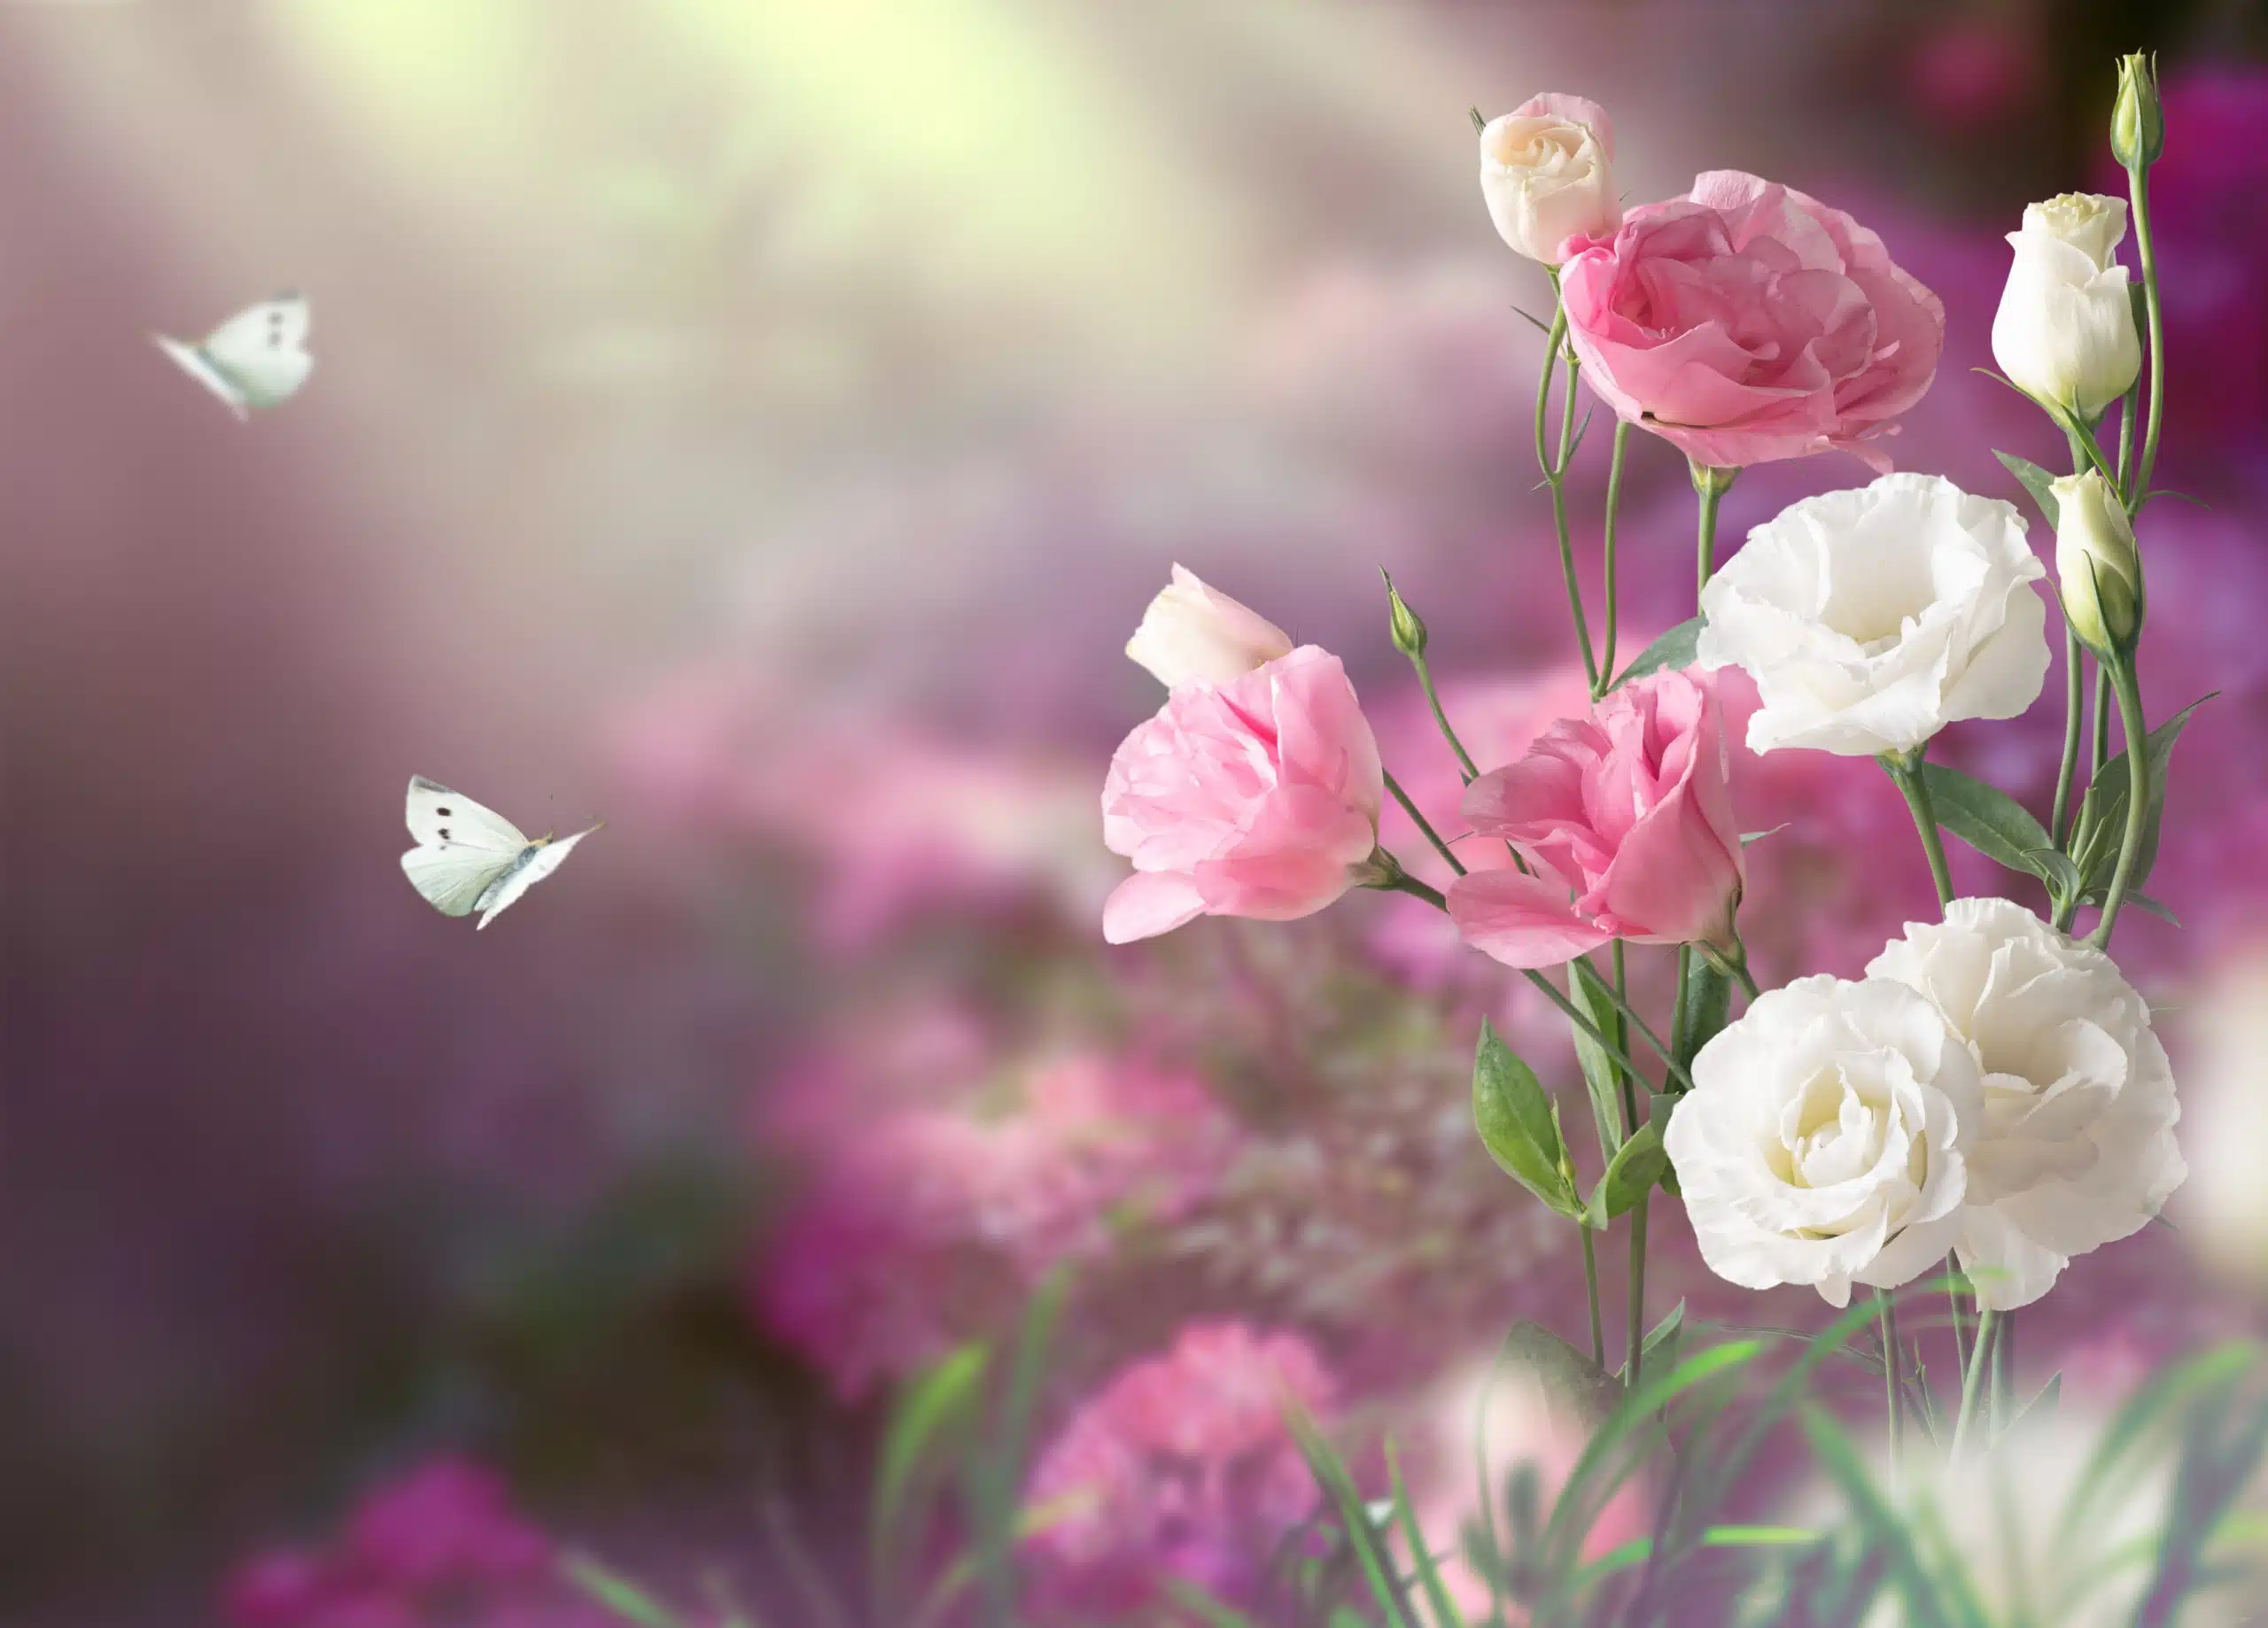 Beautiful flowers in enchanted garden with white butterflies.